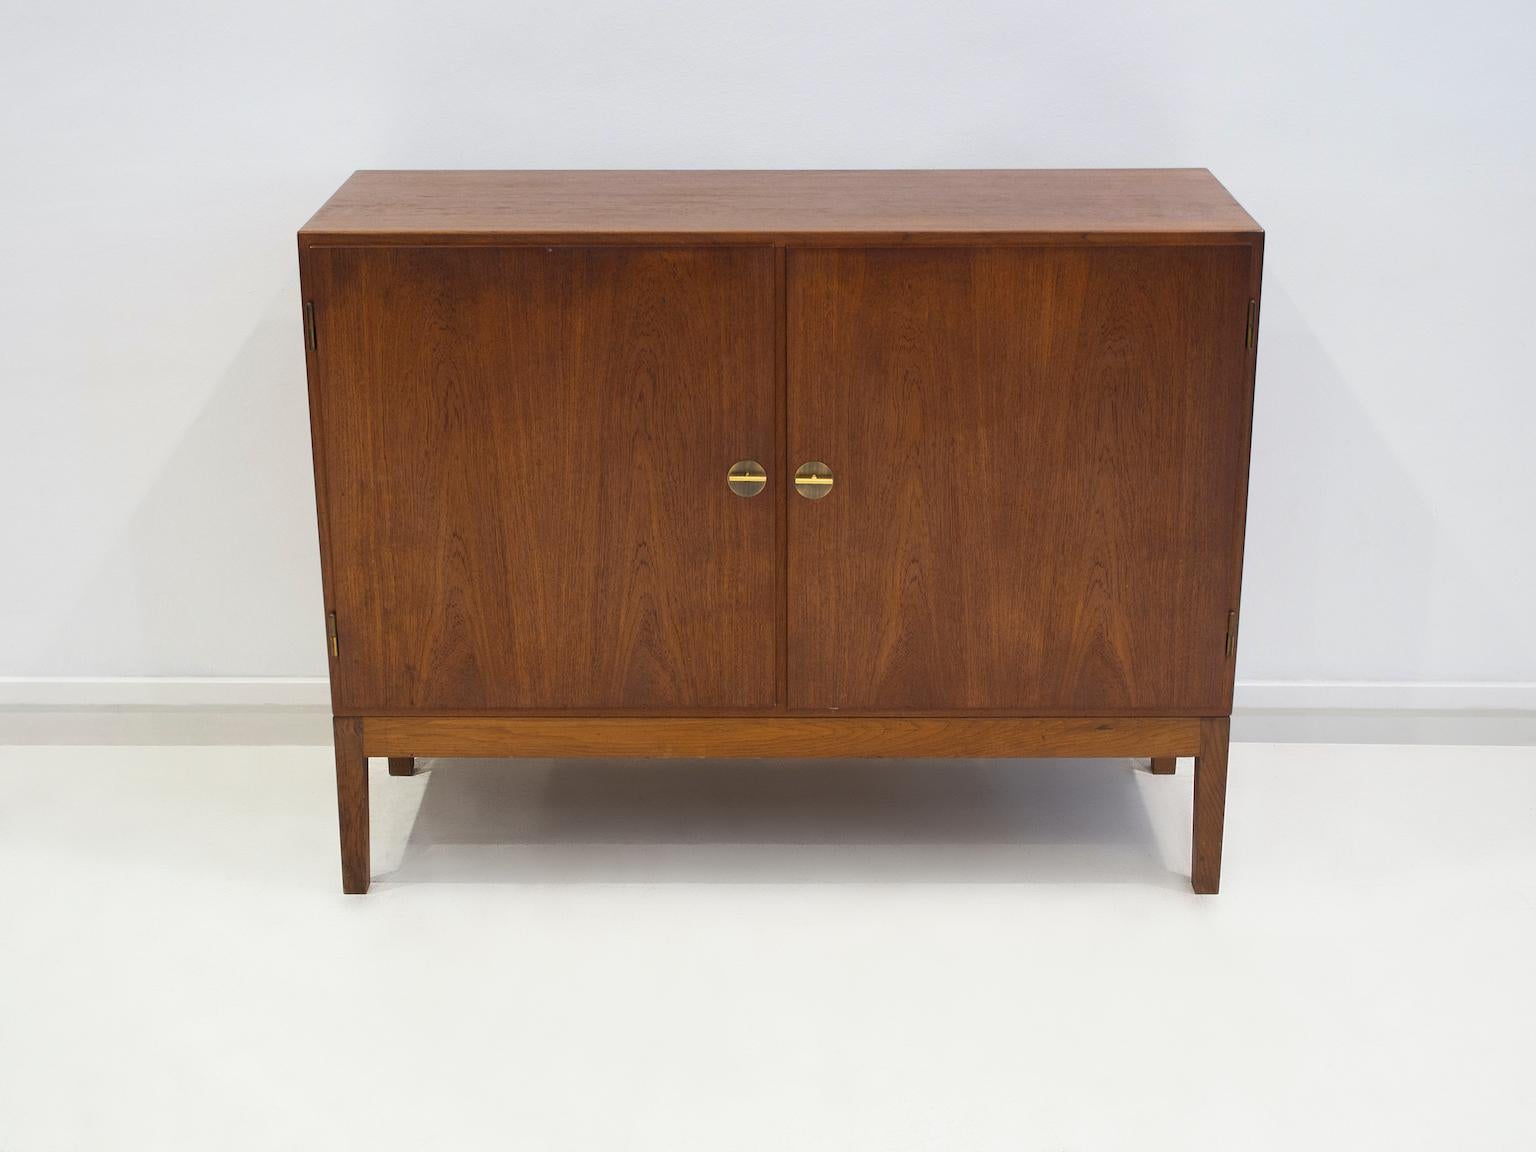 Cabinet of teak, later mounted on unoriginal oak feet of slightly lighter color. Front with two doors. Interior with two shelves and four pullout trays. Manufactured in Denmark by FDB Møbler. Two keys that serve as handles included.